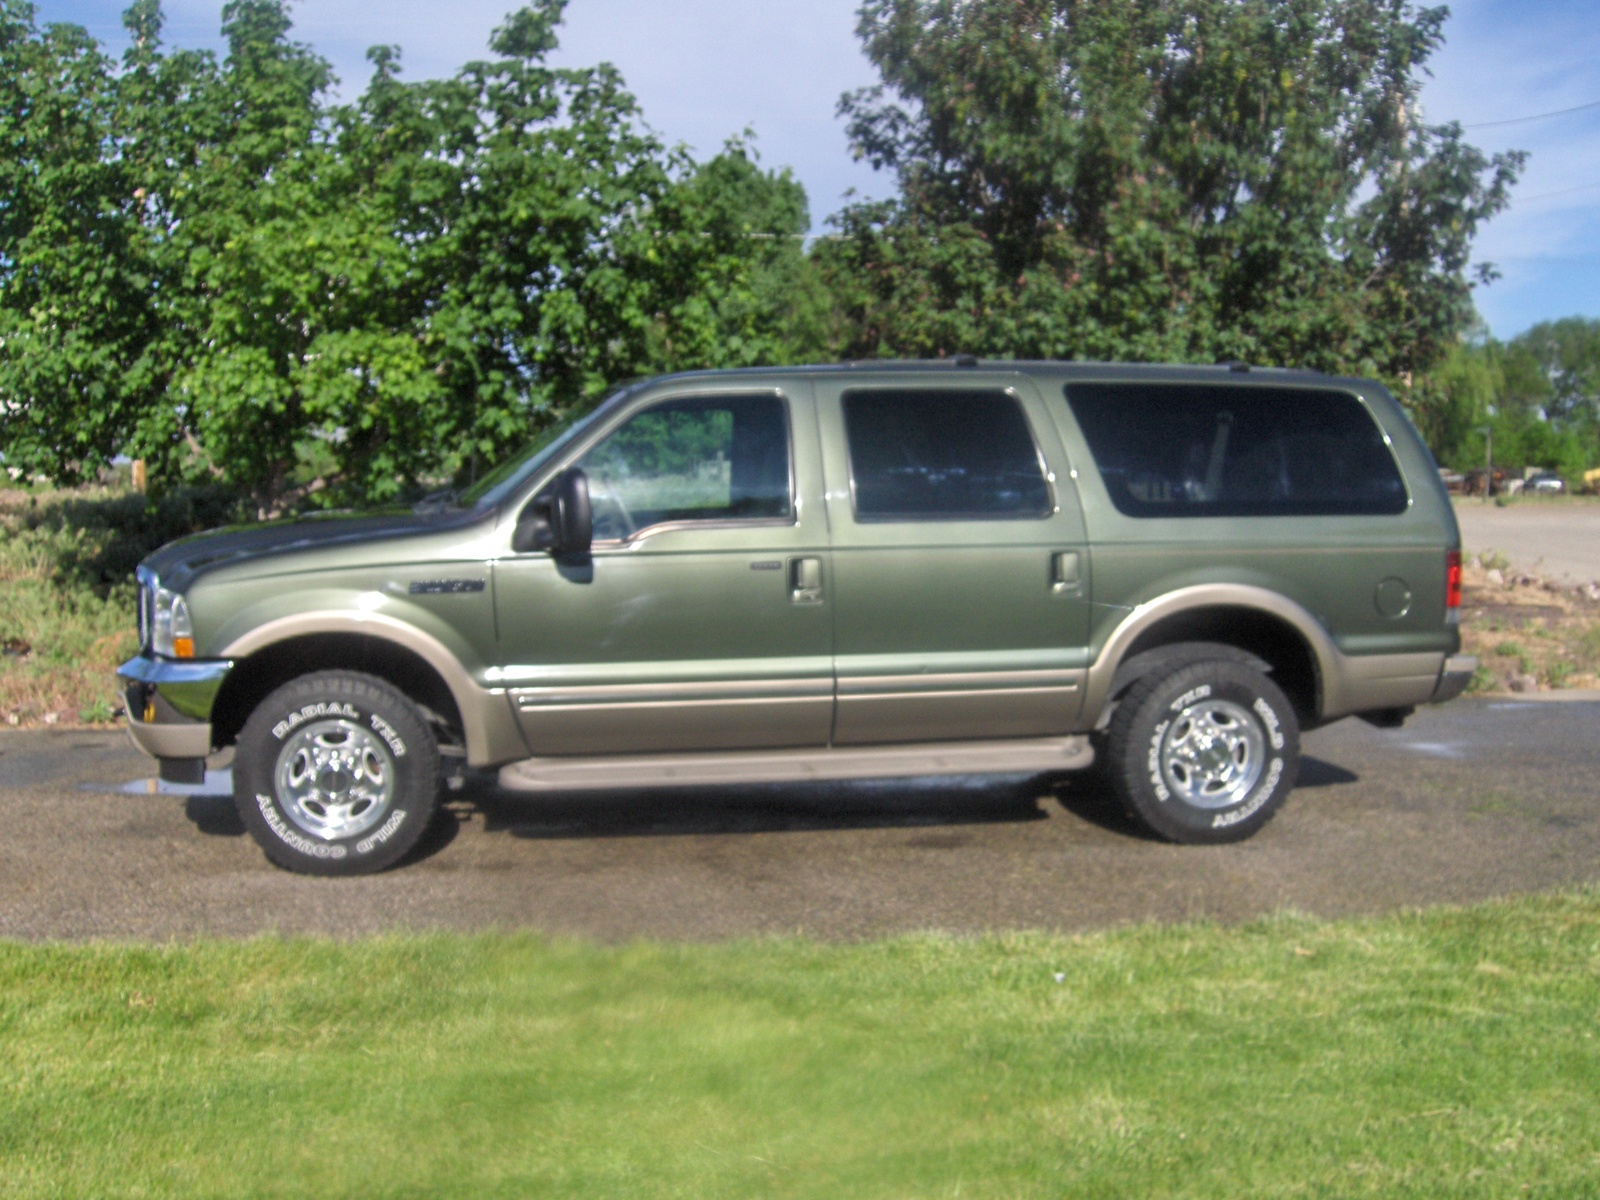 2002 Ford excursion limited reviews #3